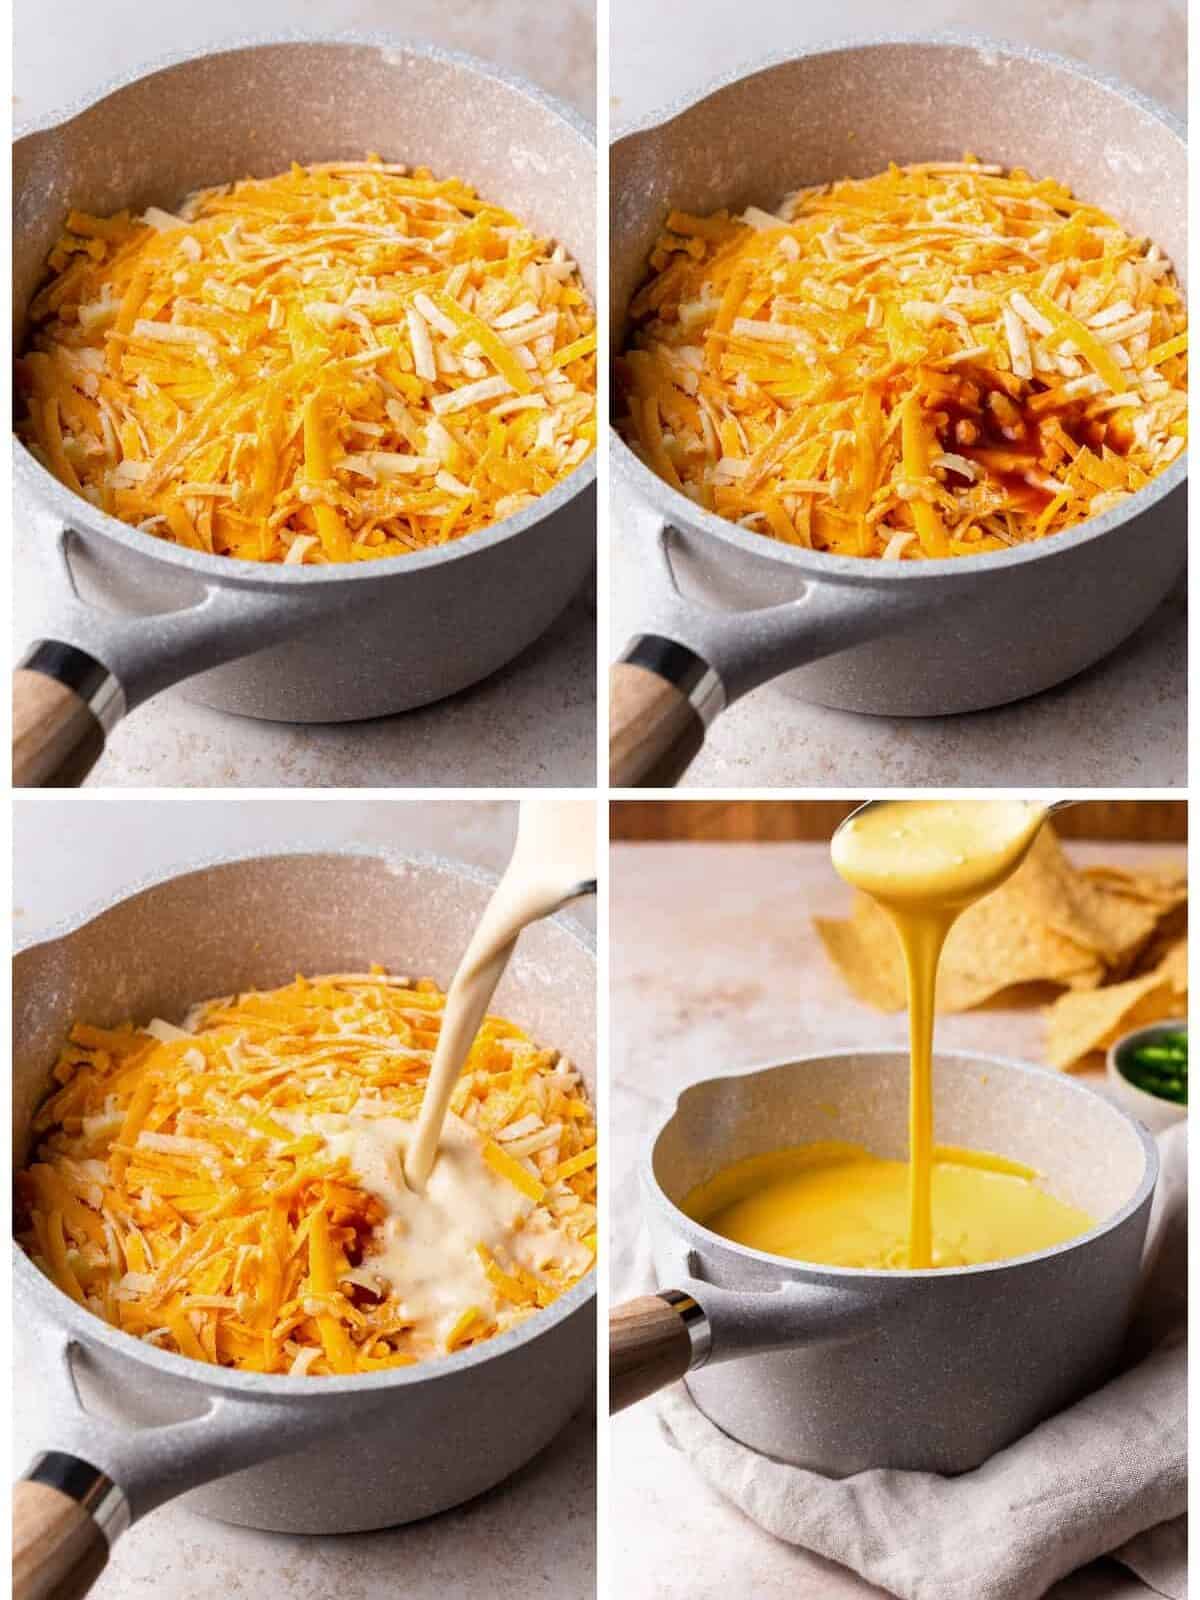 how to make nacho cheese step by step photo instructions